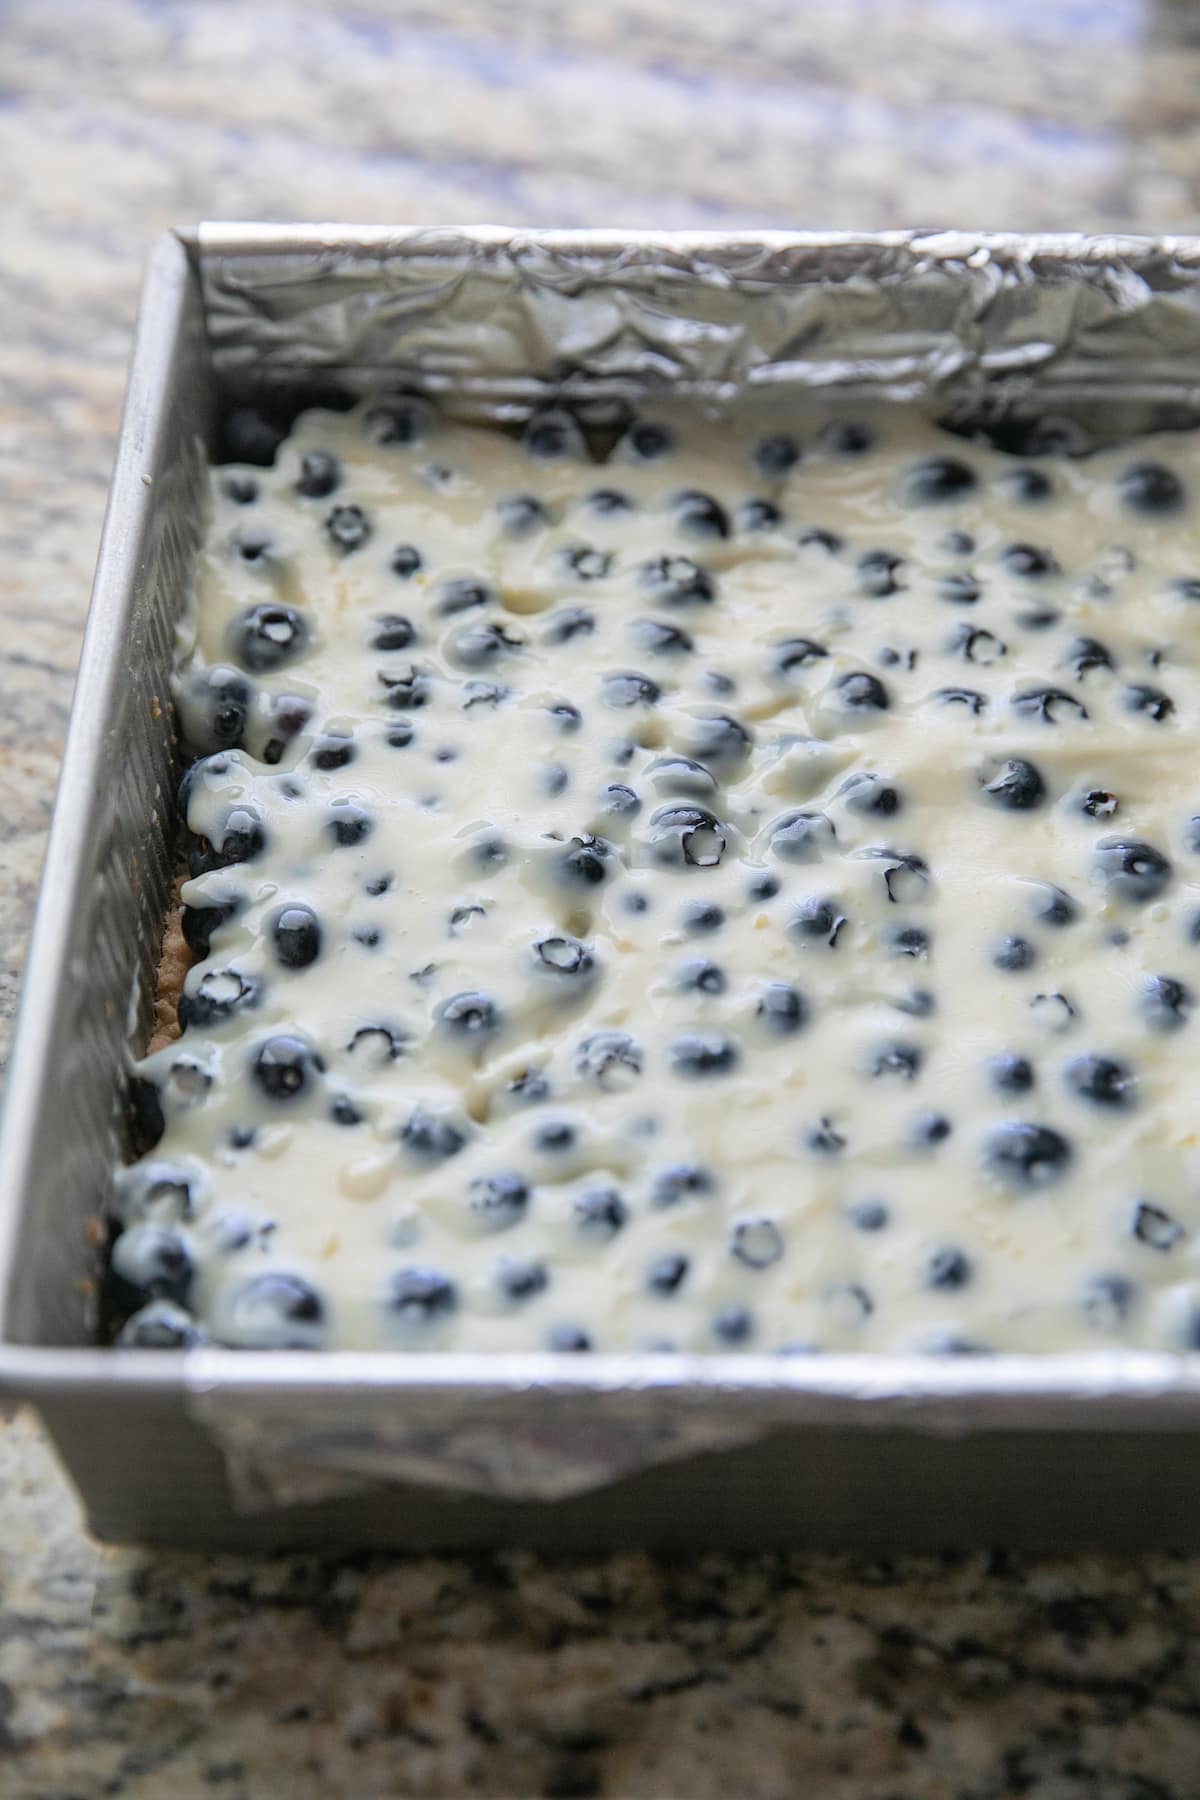 lemon mixture covering blueberries in a baking pan, unbaked